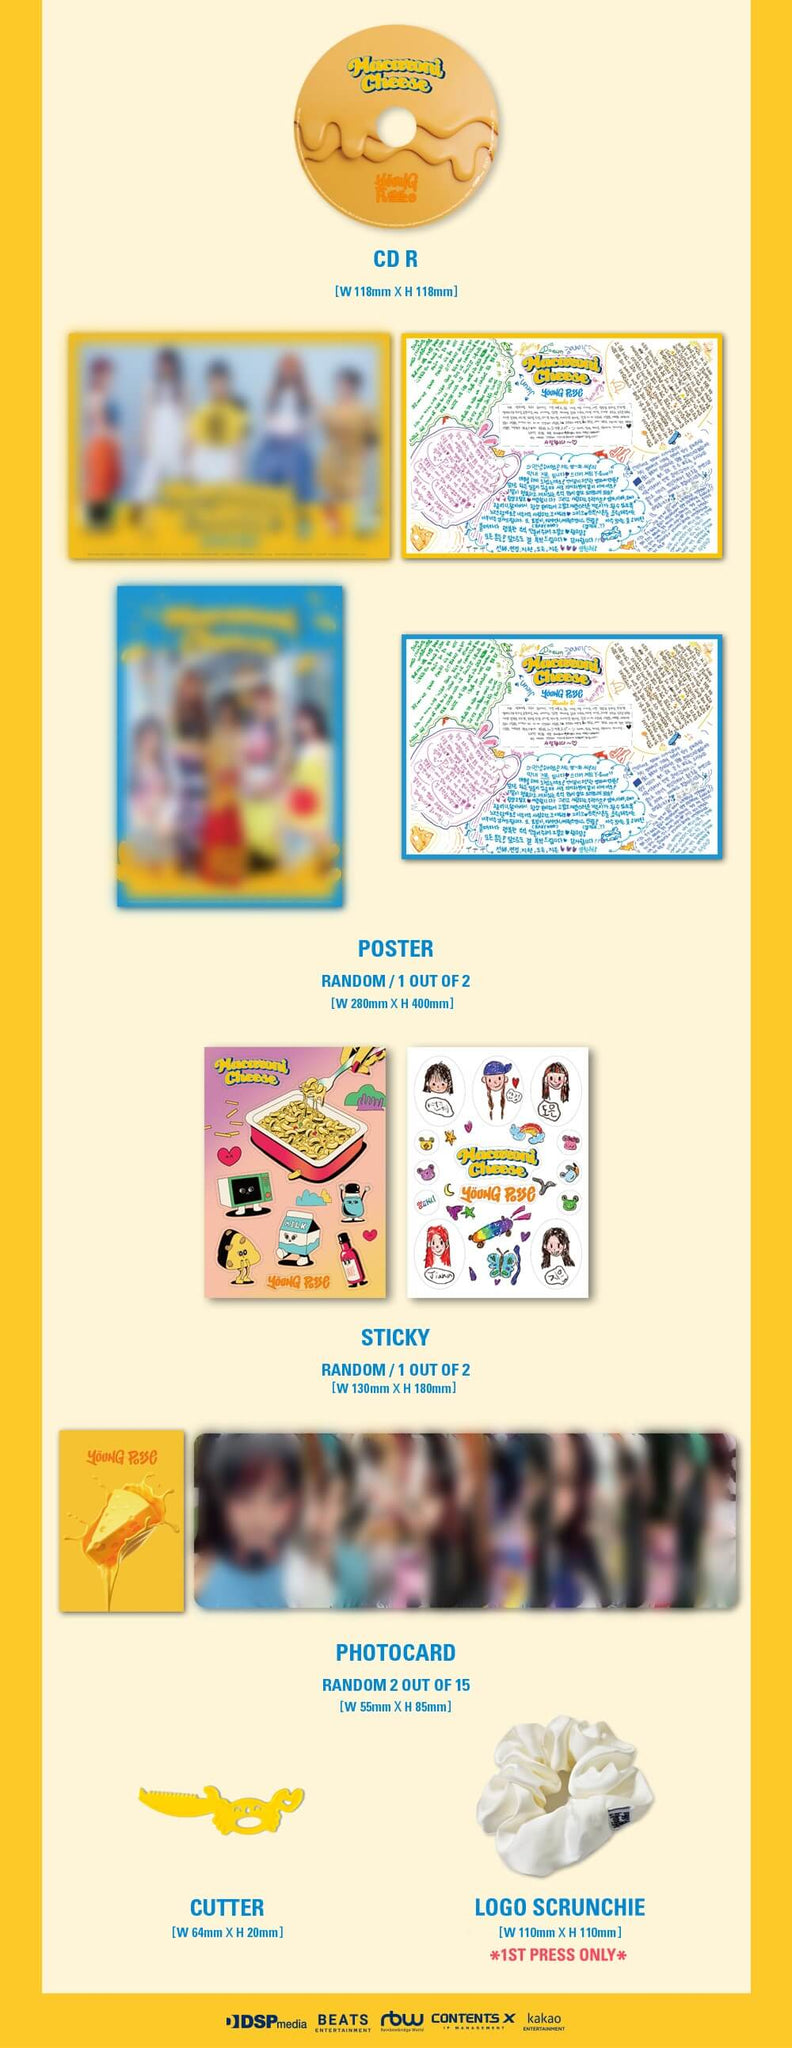 YOUNG POSSE 1st EP Album MACARONI CHEESE Inclusions CD Folded Poster Sticker Photocards Cutter Pre-order Logo Scrunchie